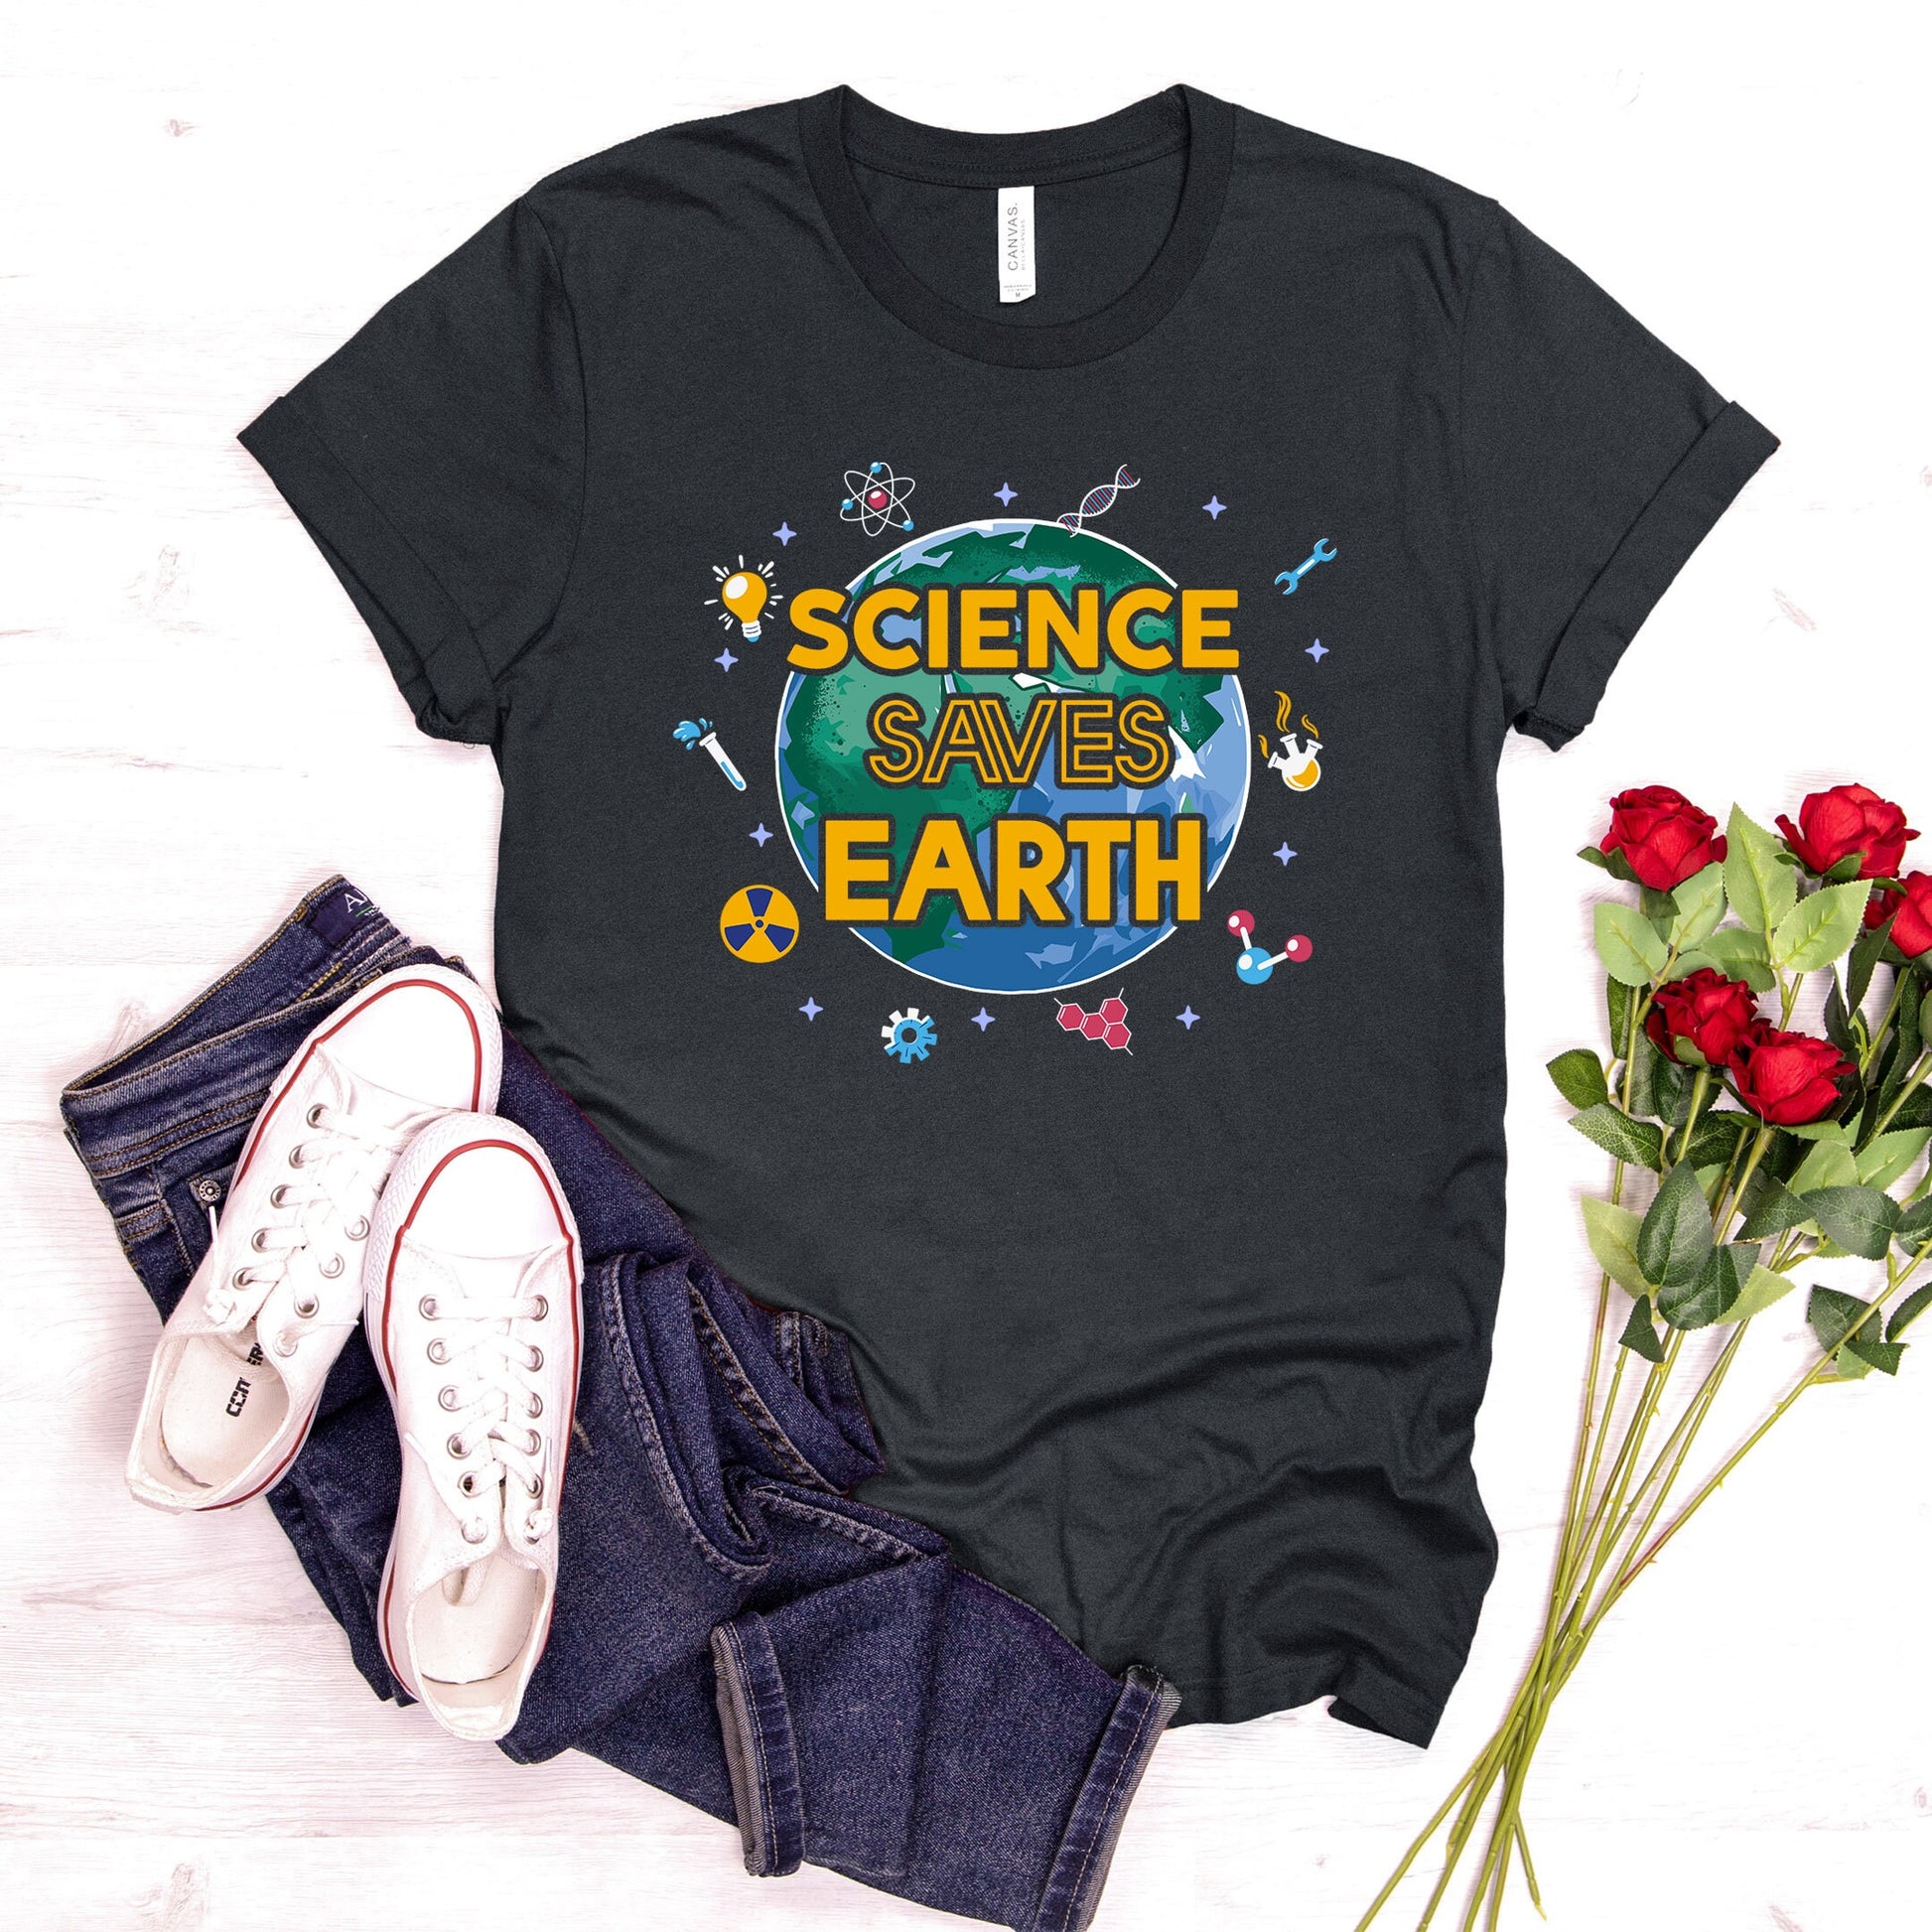 Science Saves Earth Shirt, Middle High School Science Teacher Gift Bday College Science Students Tee, College Undergrad Professor Earth Week